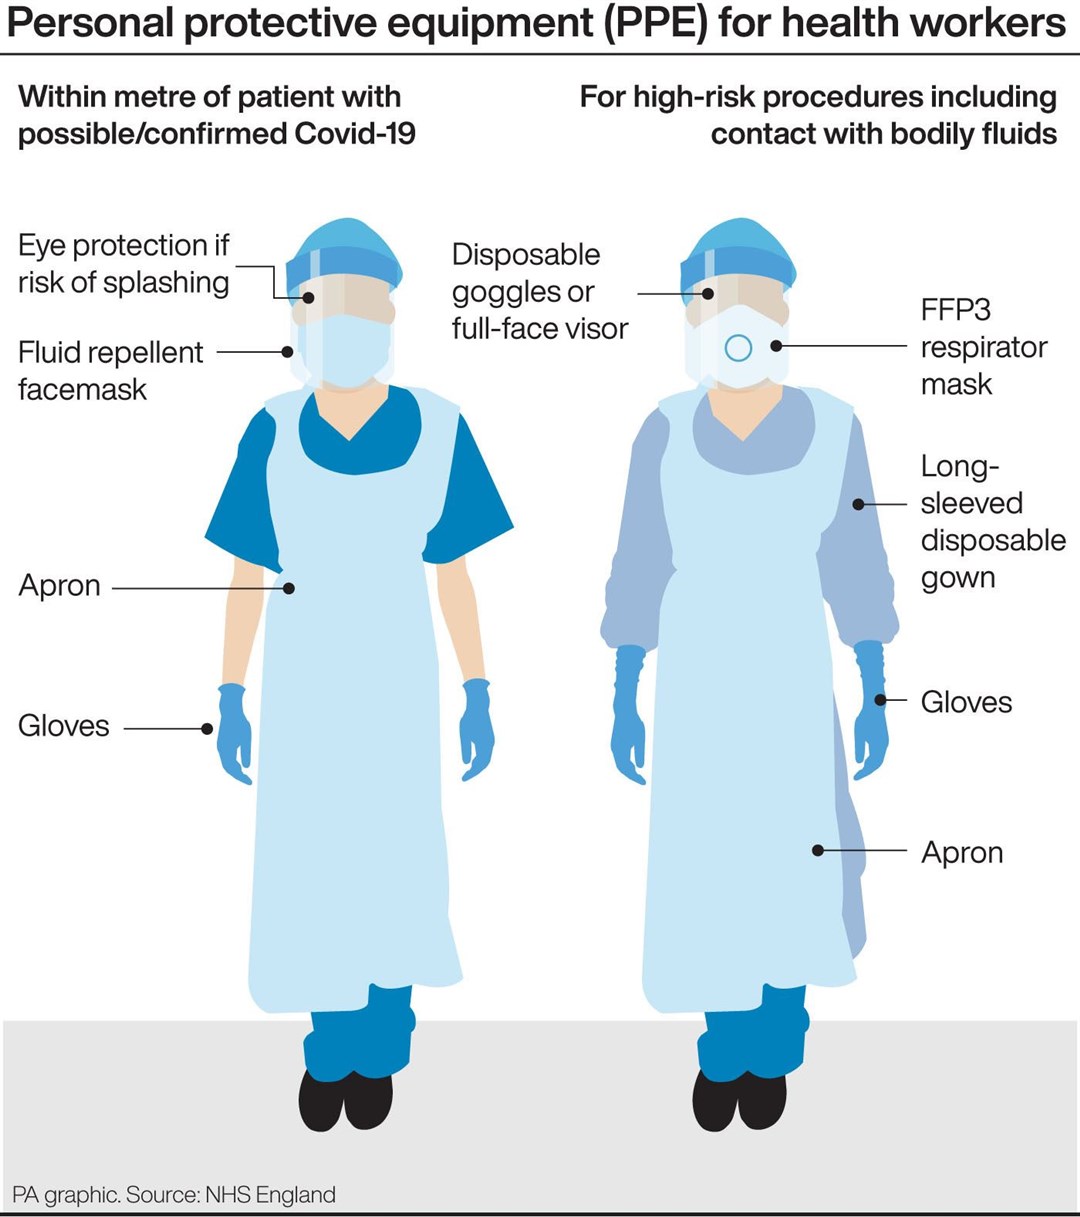 Personal protective equipment for health workers (PA Graphics)